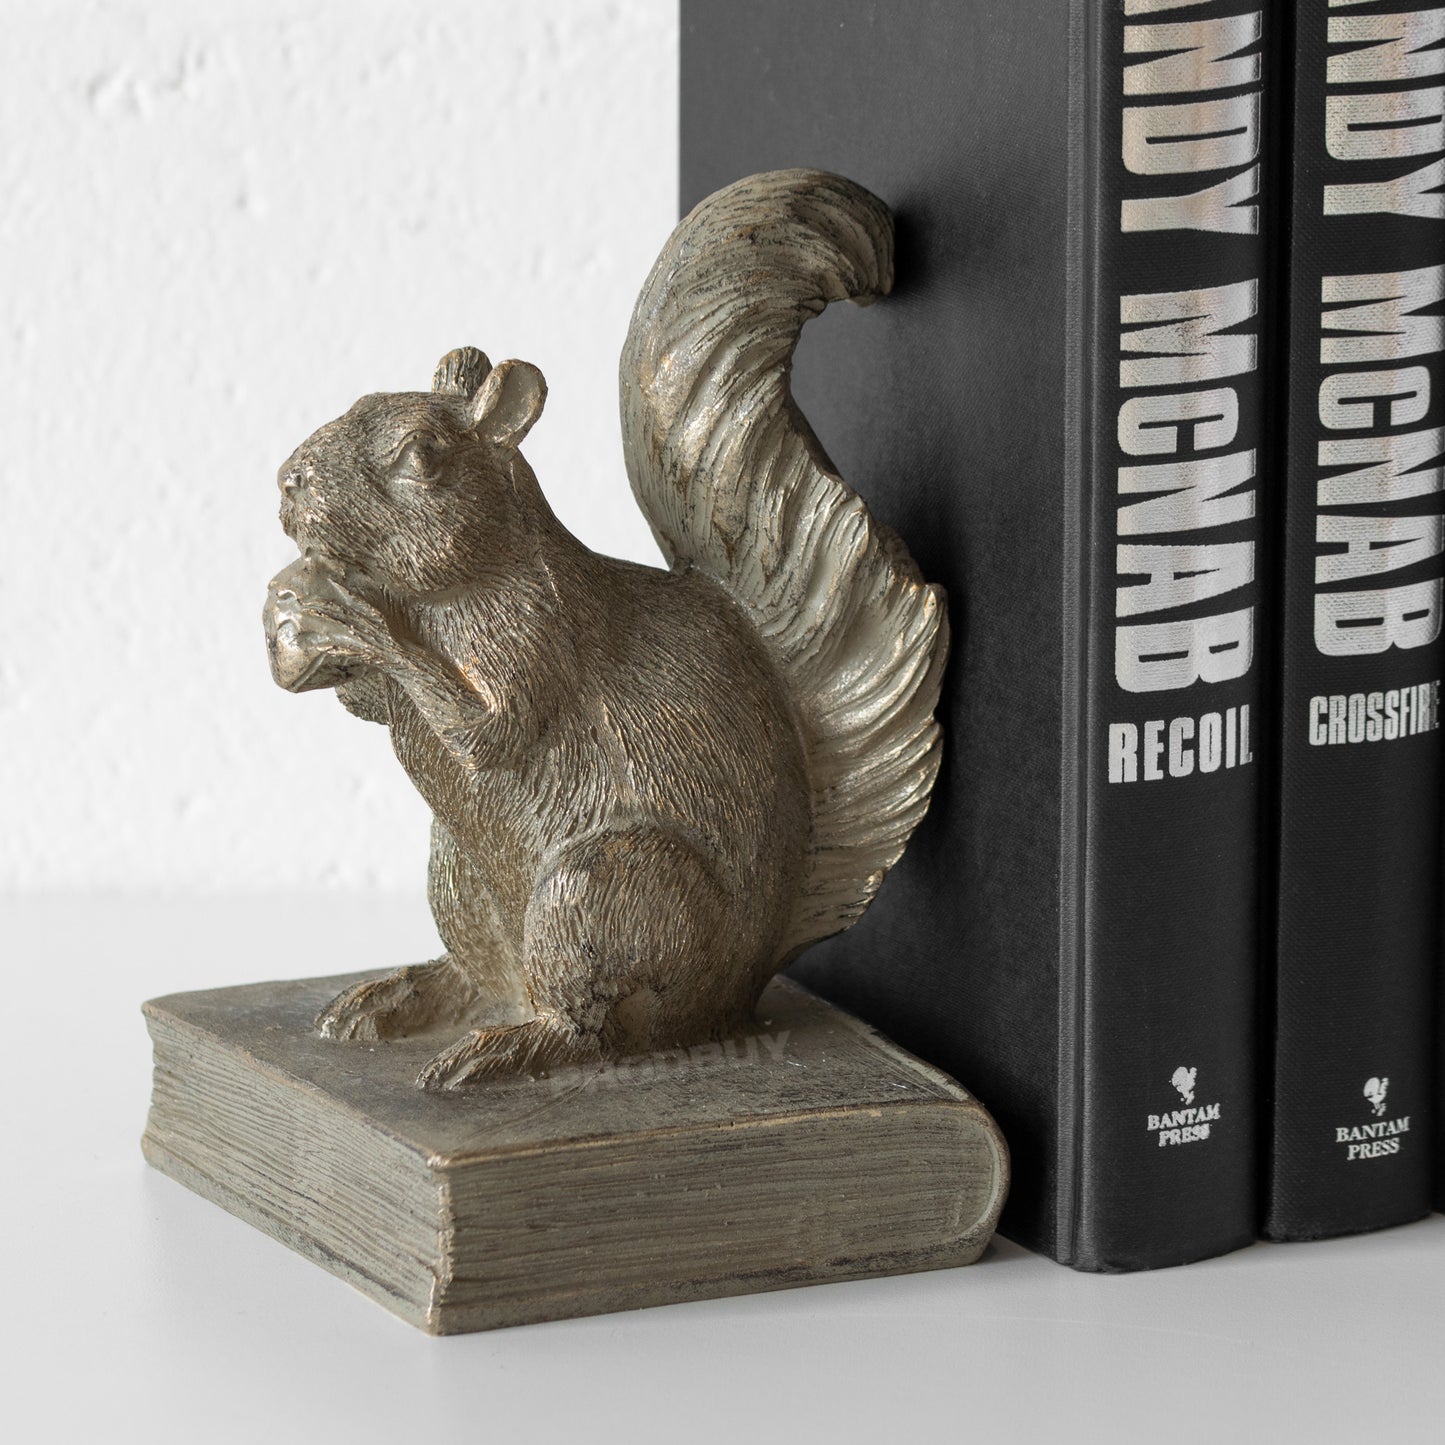 Squirrel Standing on Book Bookend Ornament